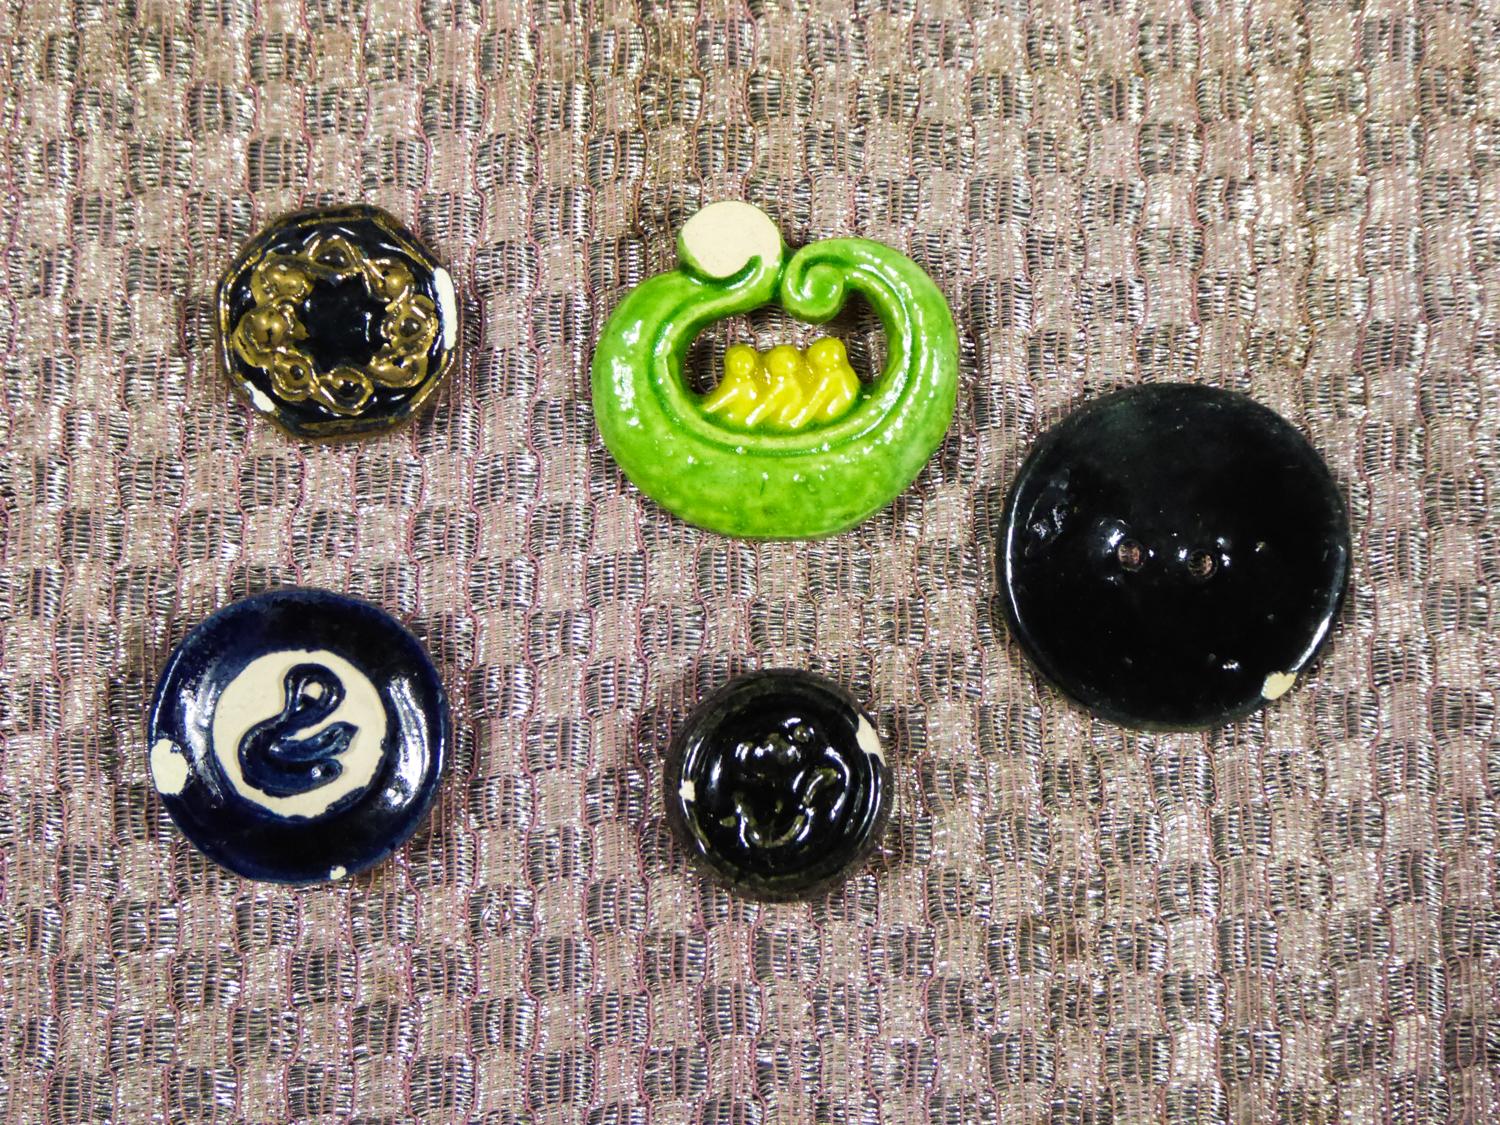 1930s buttons